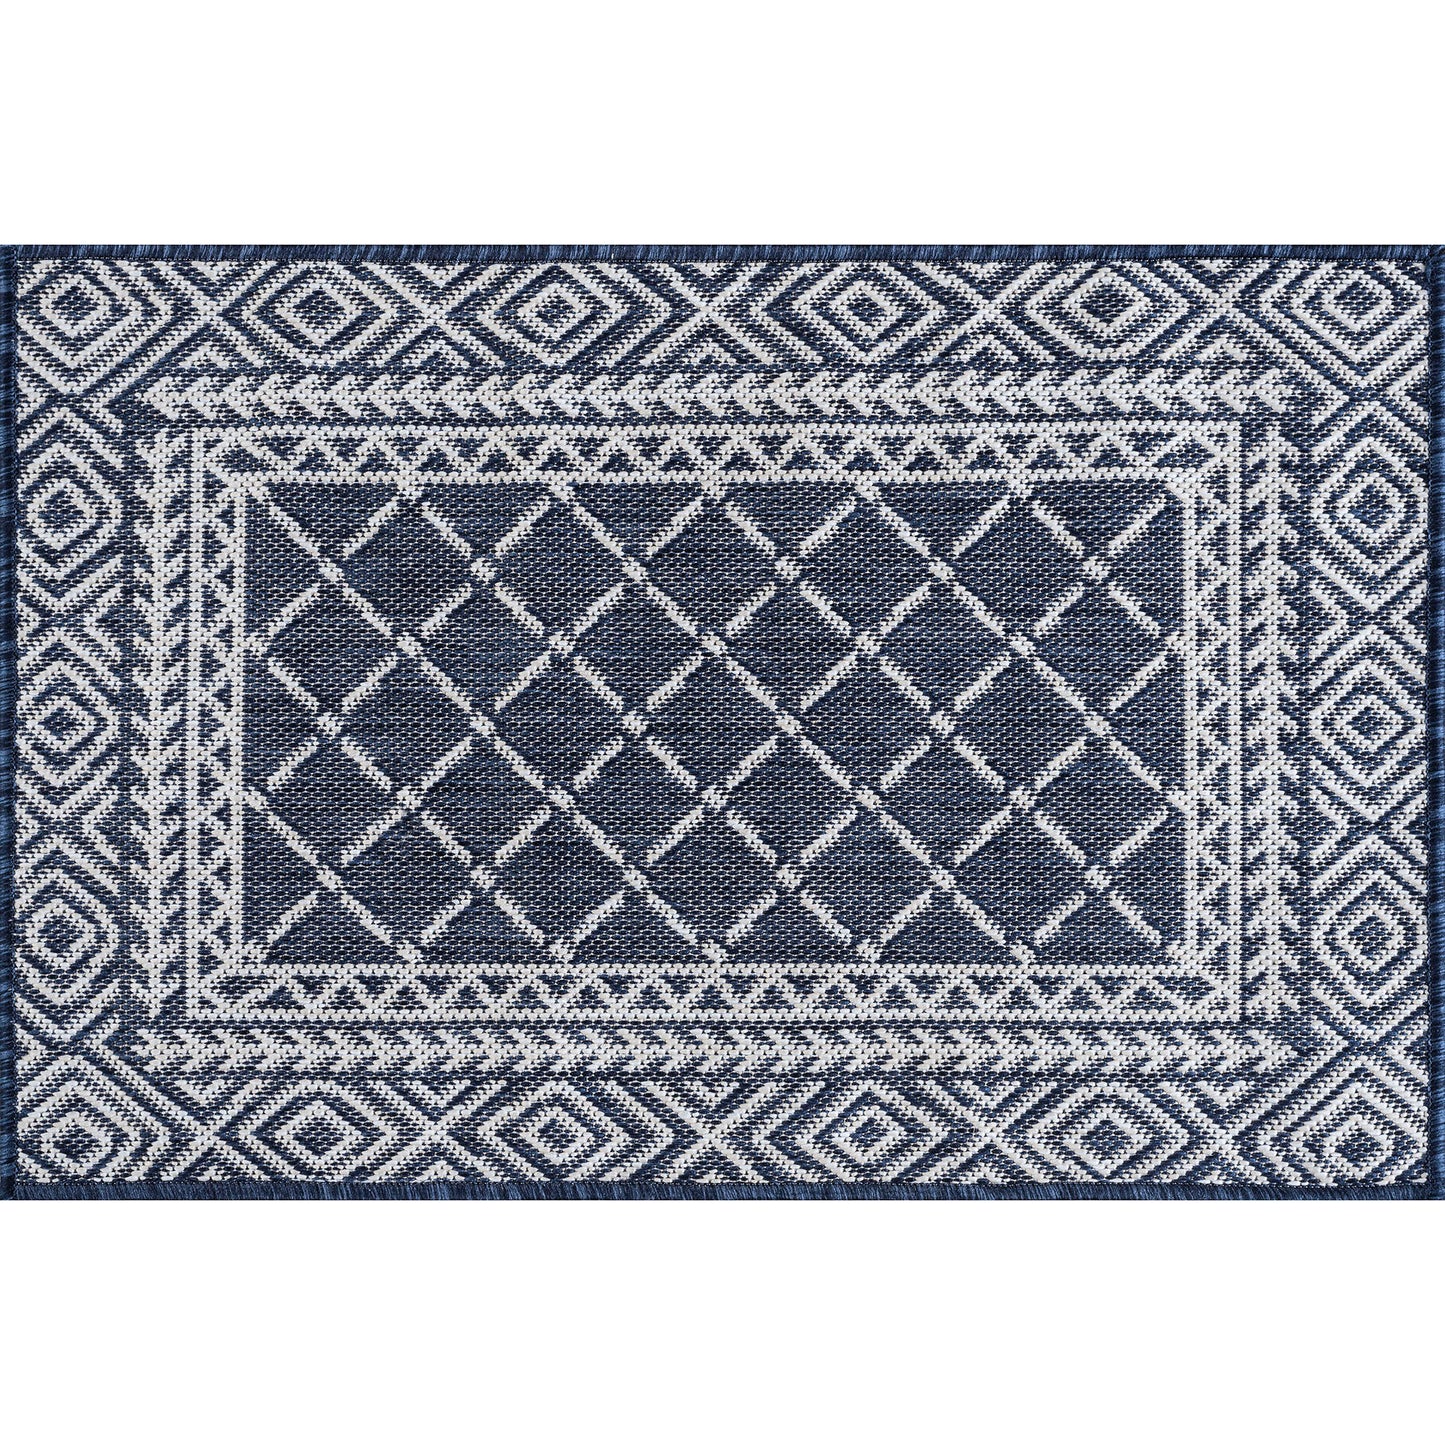 Eco-ECO21 Flat Weave Synthetic Blend Indoor/Outdoor Area Rug by Tayse Rugs